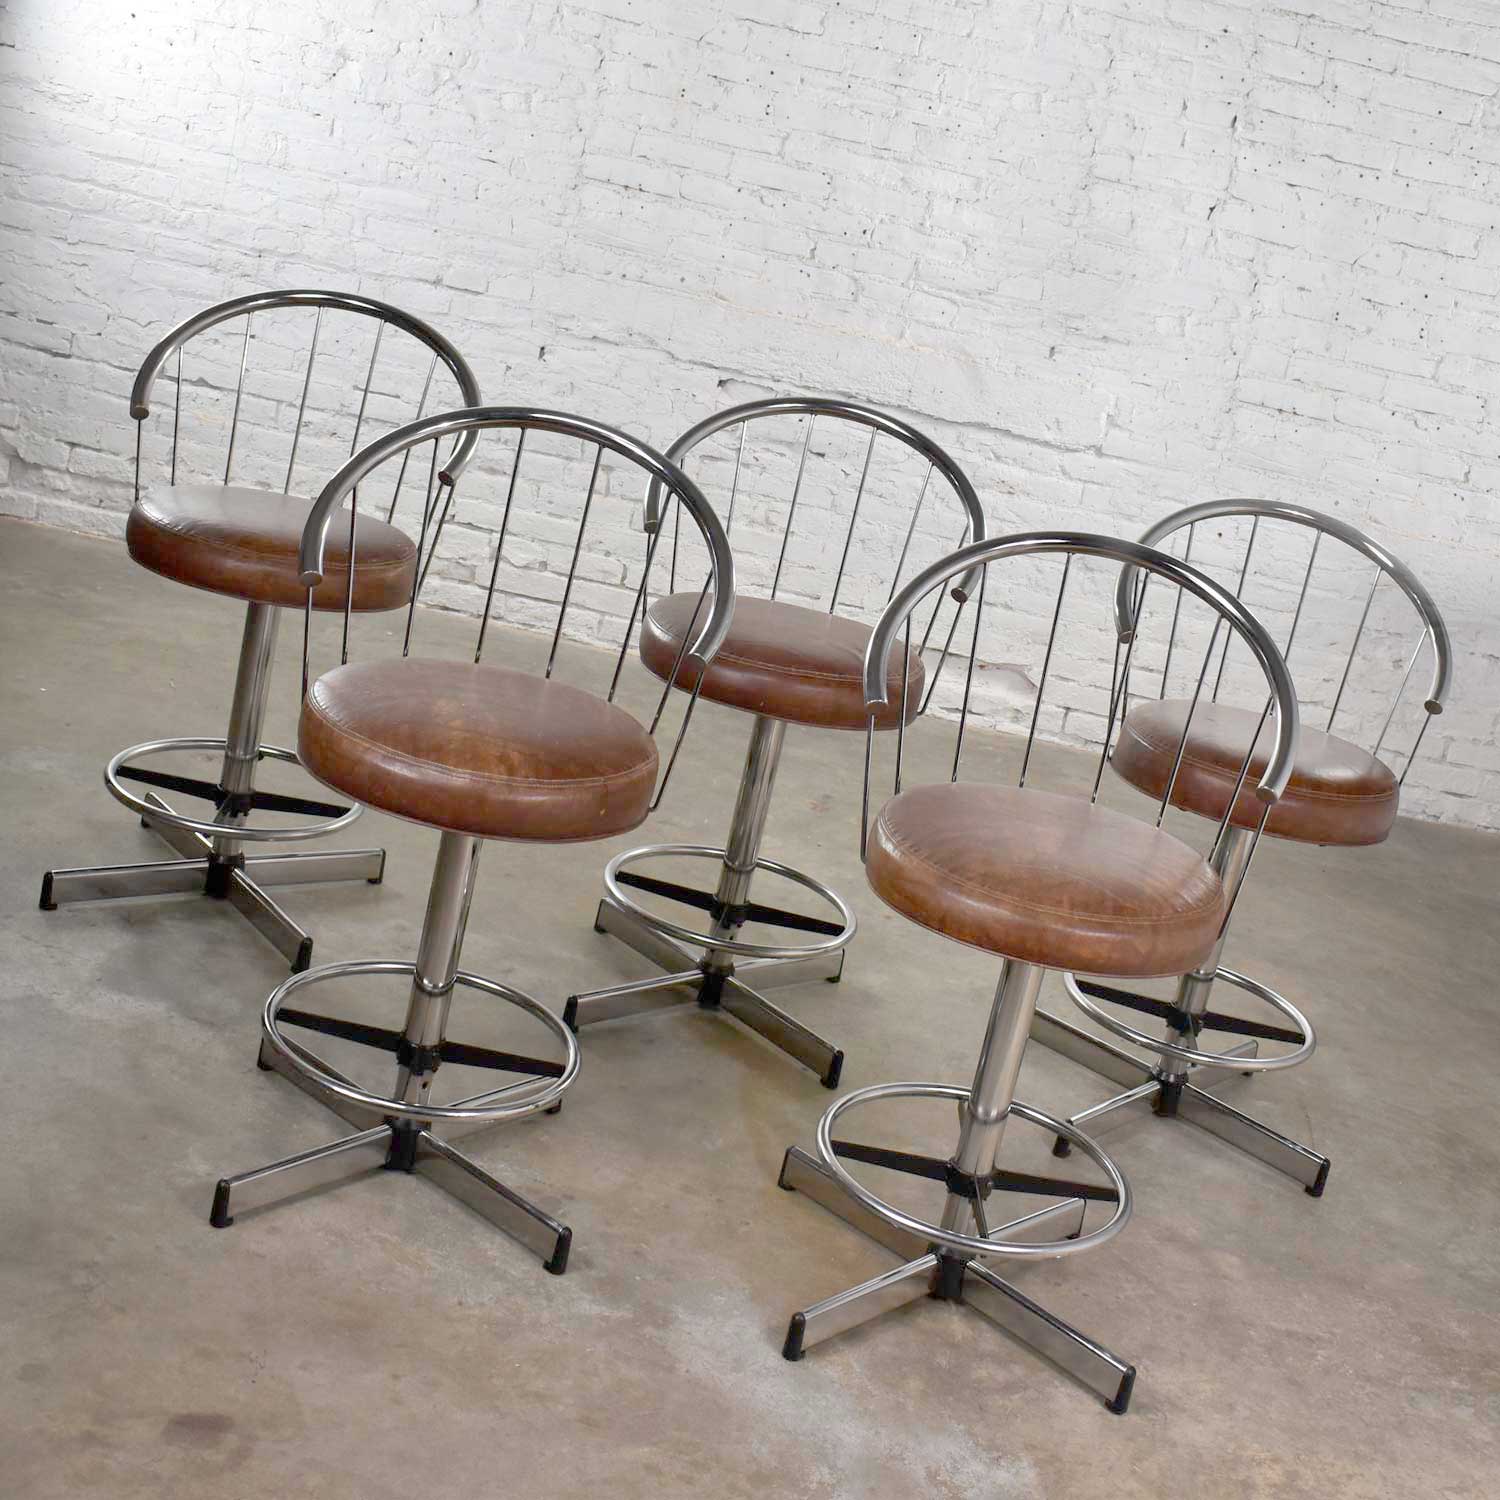 5 Cosco Vintage Modern Chrome Bar or Counter Stools w/ Brown Vinyl Faux Leather Seats